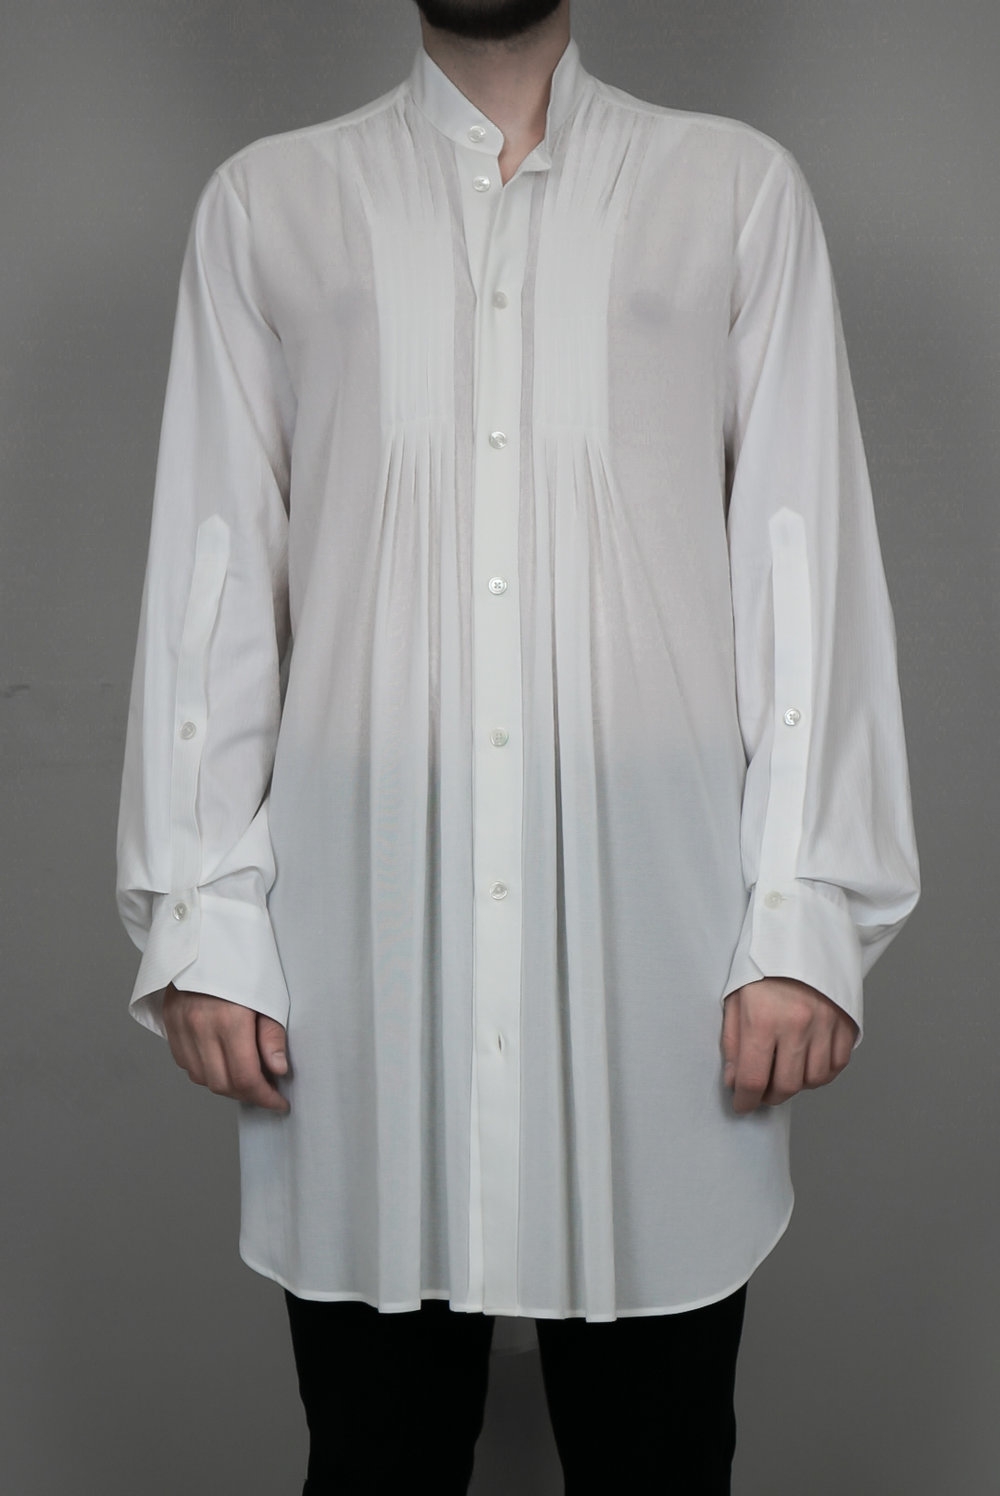 Ann Demeulemeester – Mens – Shirt – White – Long Sleeved – Cotton – Gathered Front